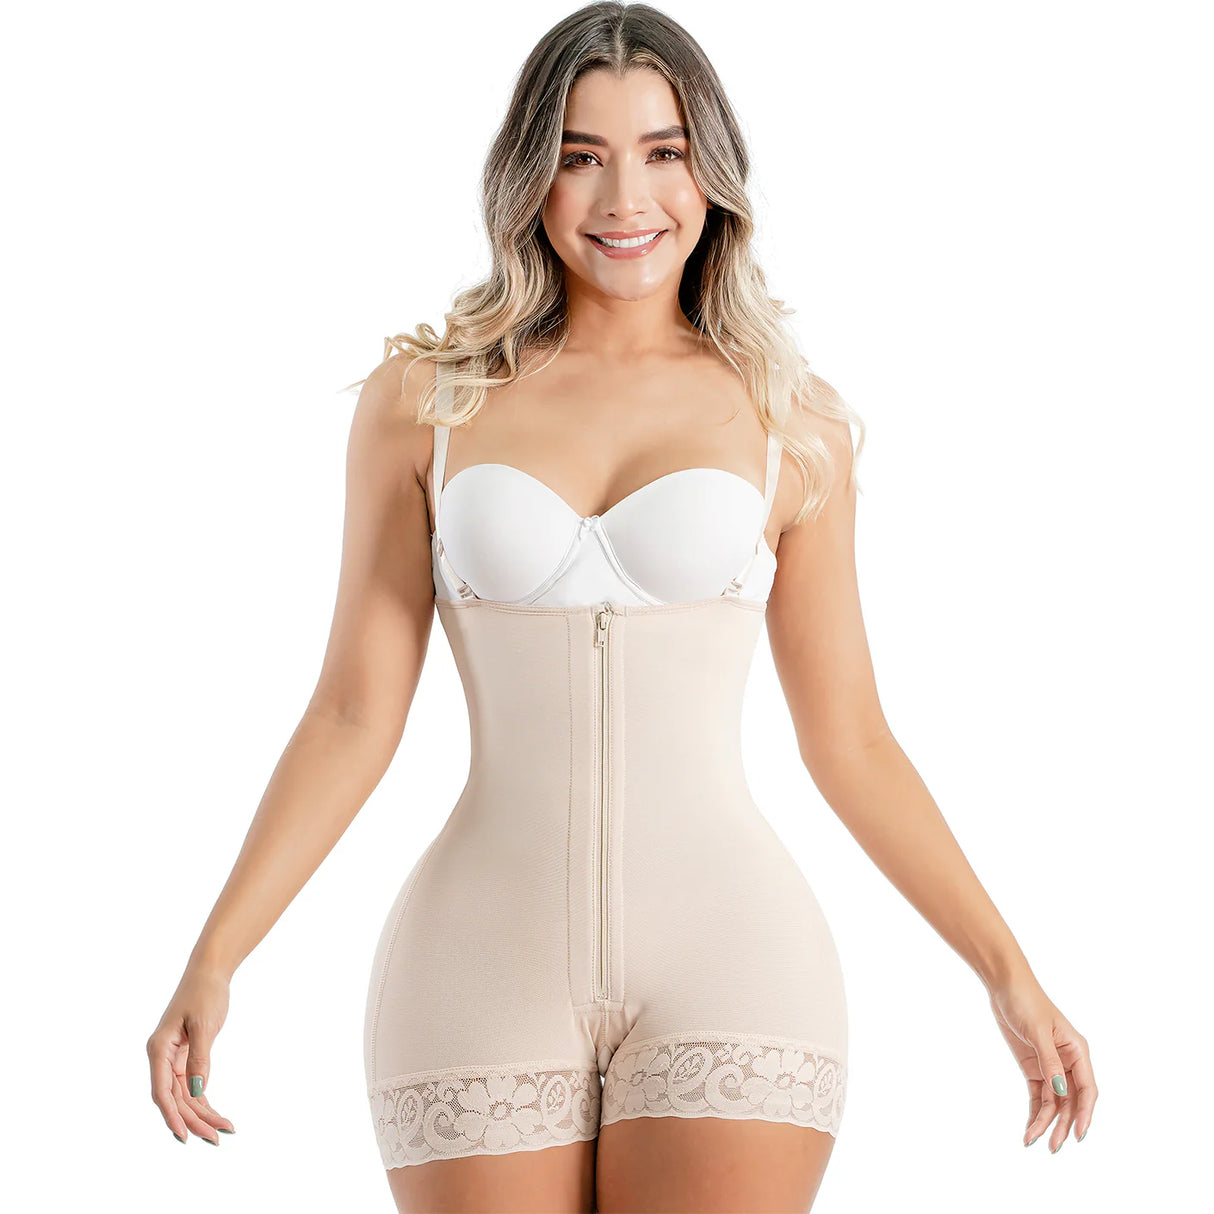 Salome 0215 Reducing Butt Lift Strapless Girdle | Colombian Girdles